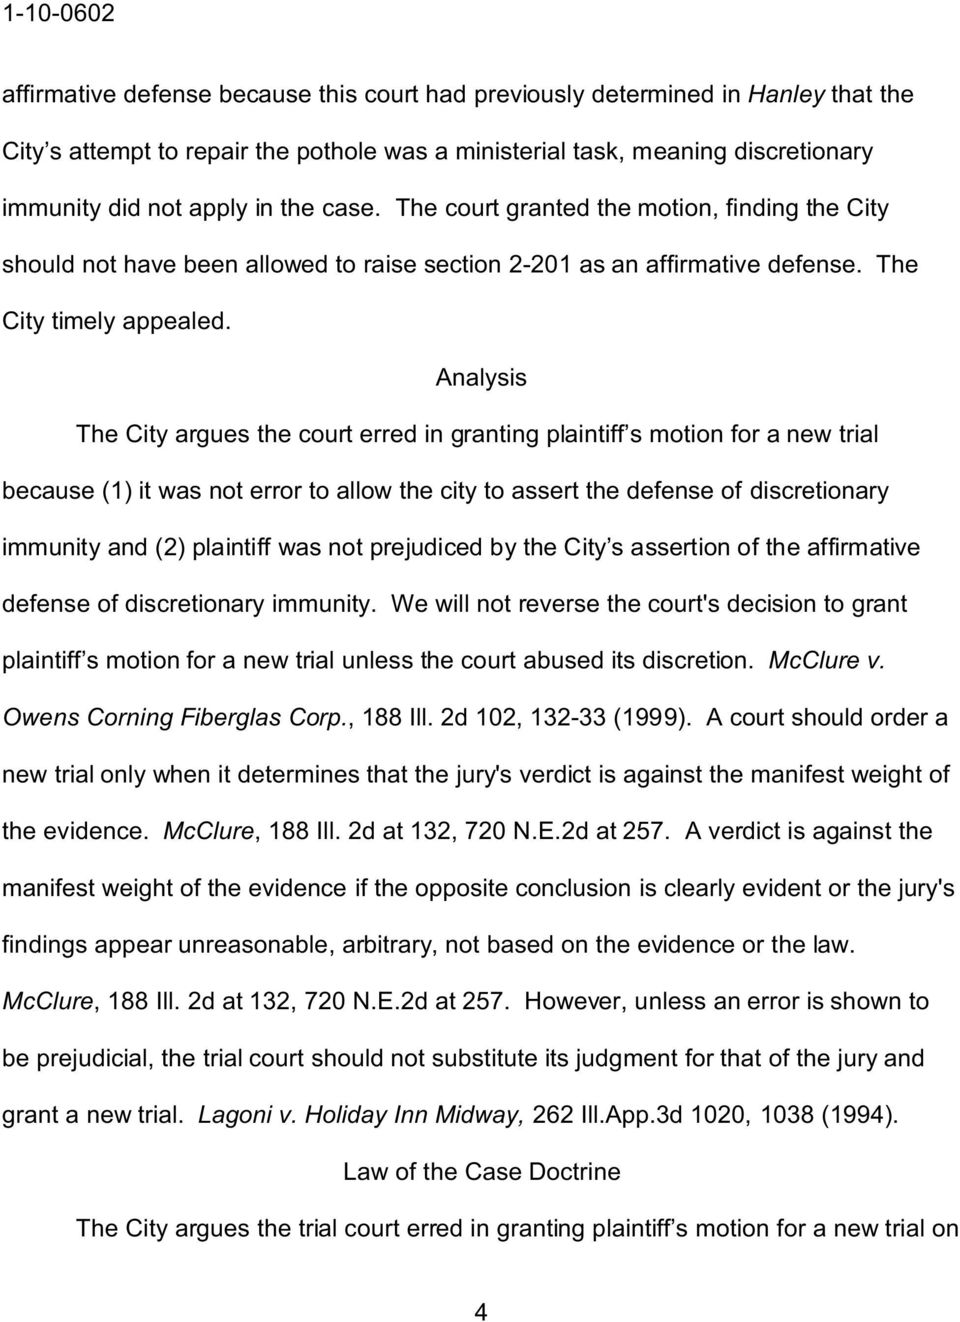 Analysis The City argues the court erred in granting plaintiff s motion for a new trial because (1 it was not error to allow the city to assert the defense of discretionary immunity and (2 plaintiff